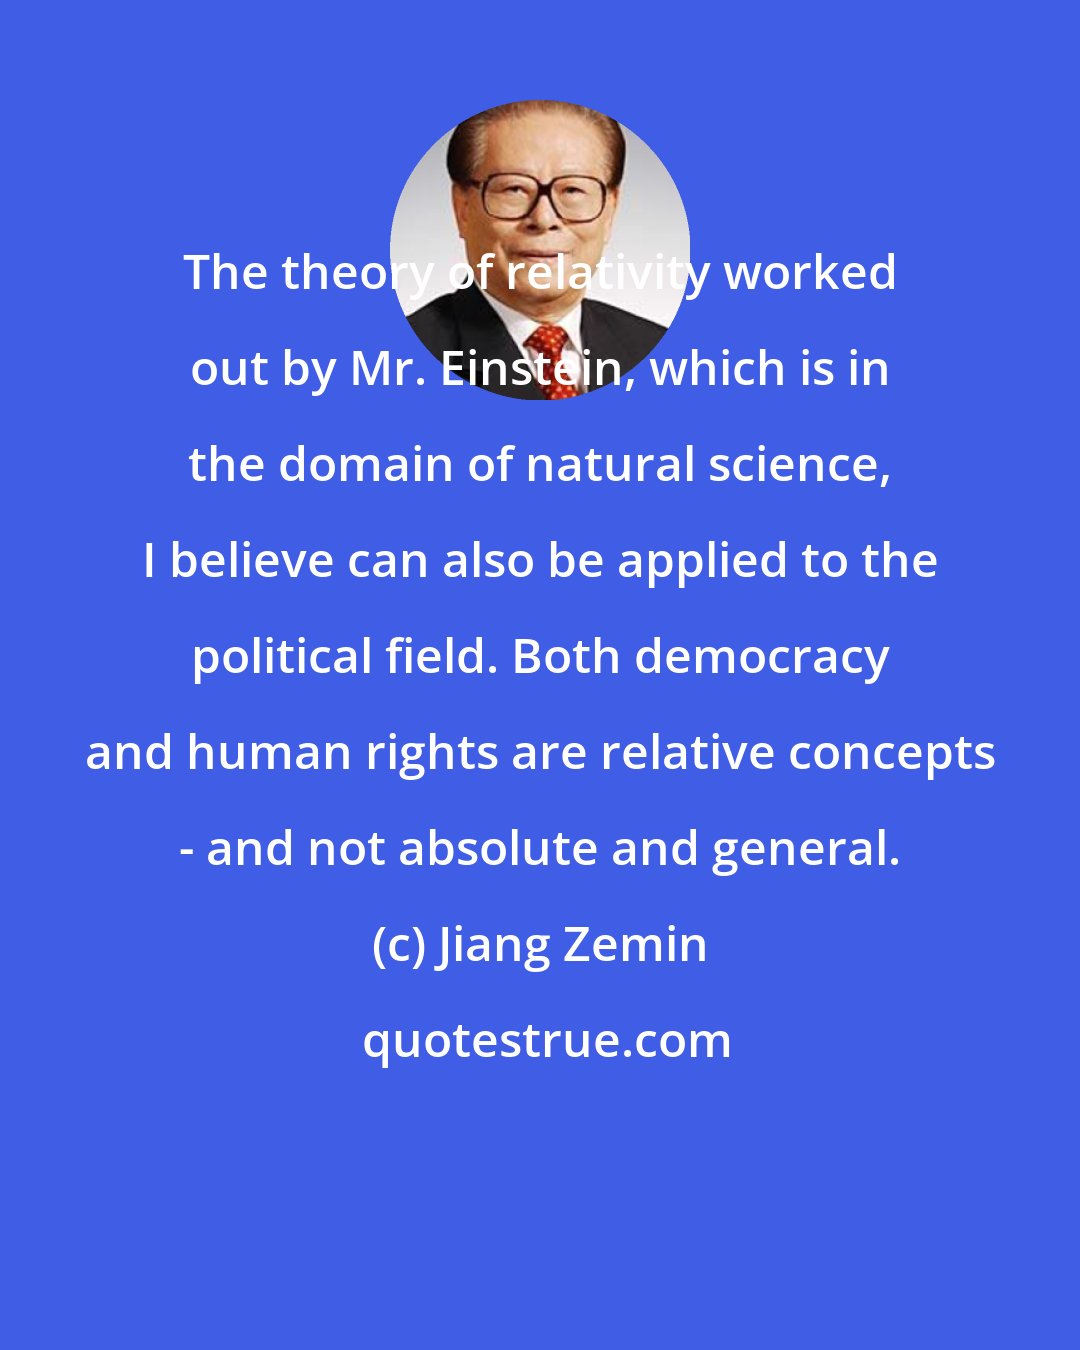 Jiang Zemin: The theory of relativity worked out by Mr. Einstein, which is in the domain of natural science, I believe can also be applied to the political field. Both democracy and human rights are relative concepts - and not absolute and general.